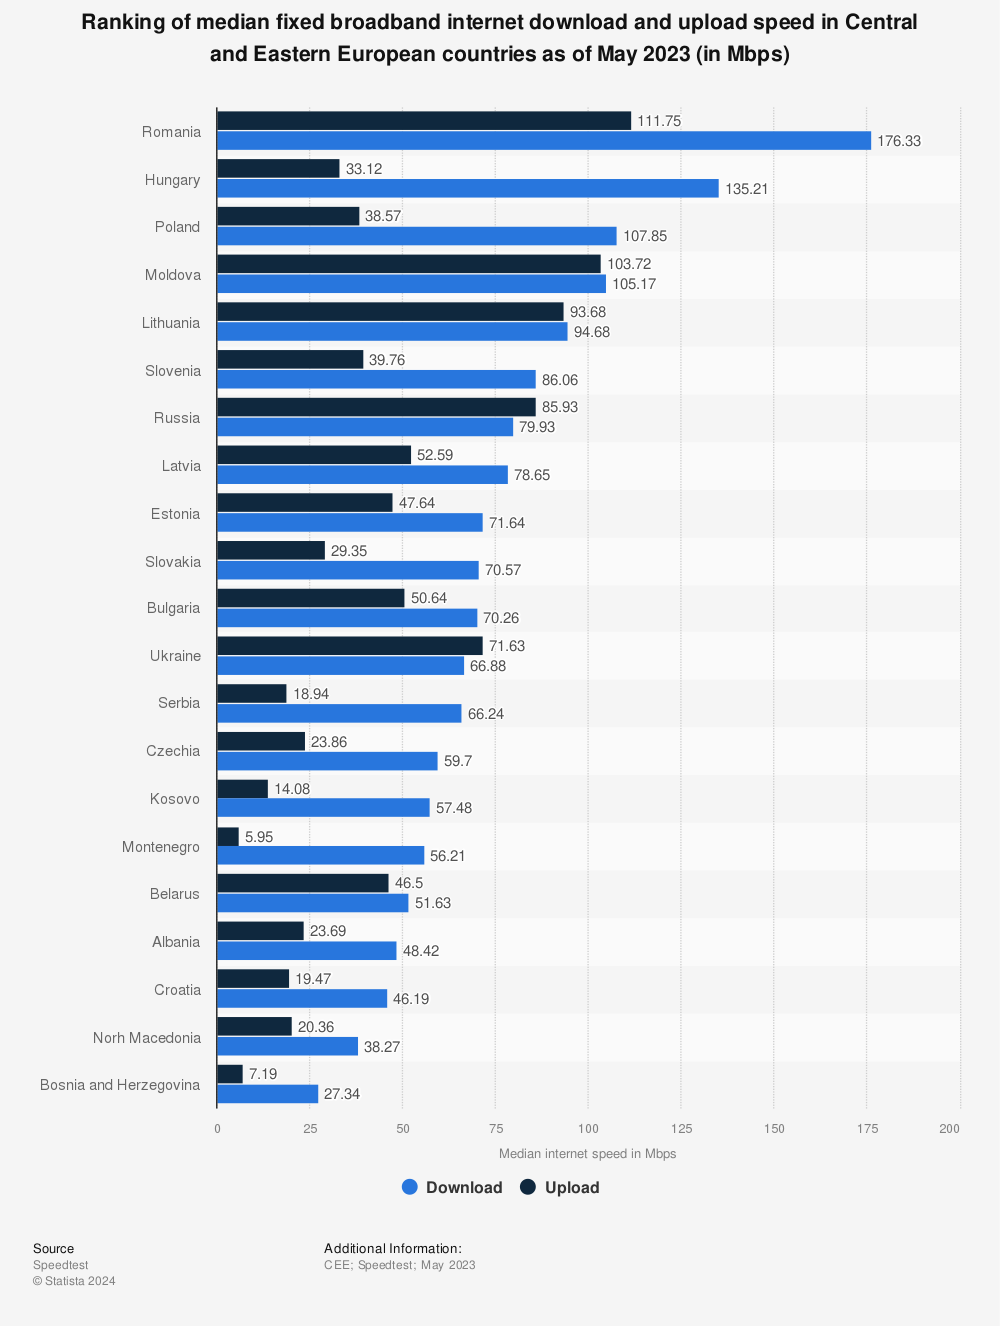 Statistic: Ranking of median fixed broadband internet download and upload speed in Central and Eastern European countries as of May 2023 (in Mbps) | Statista